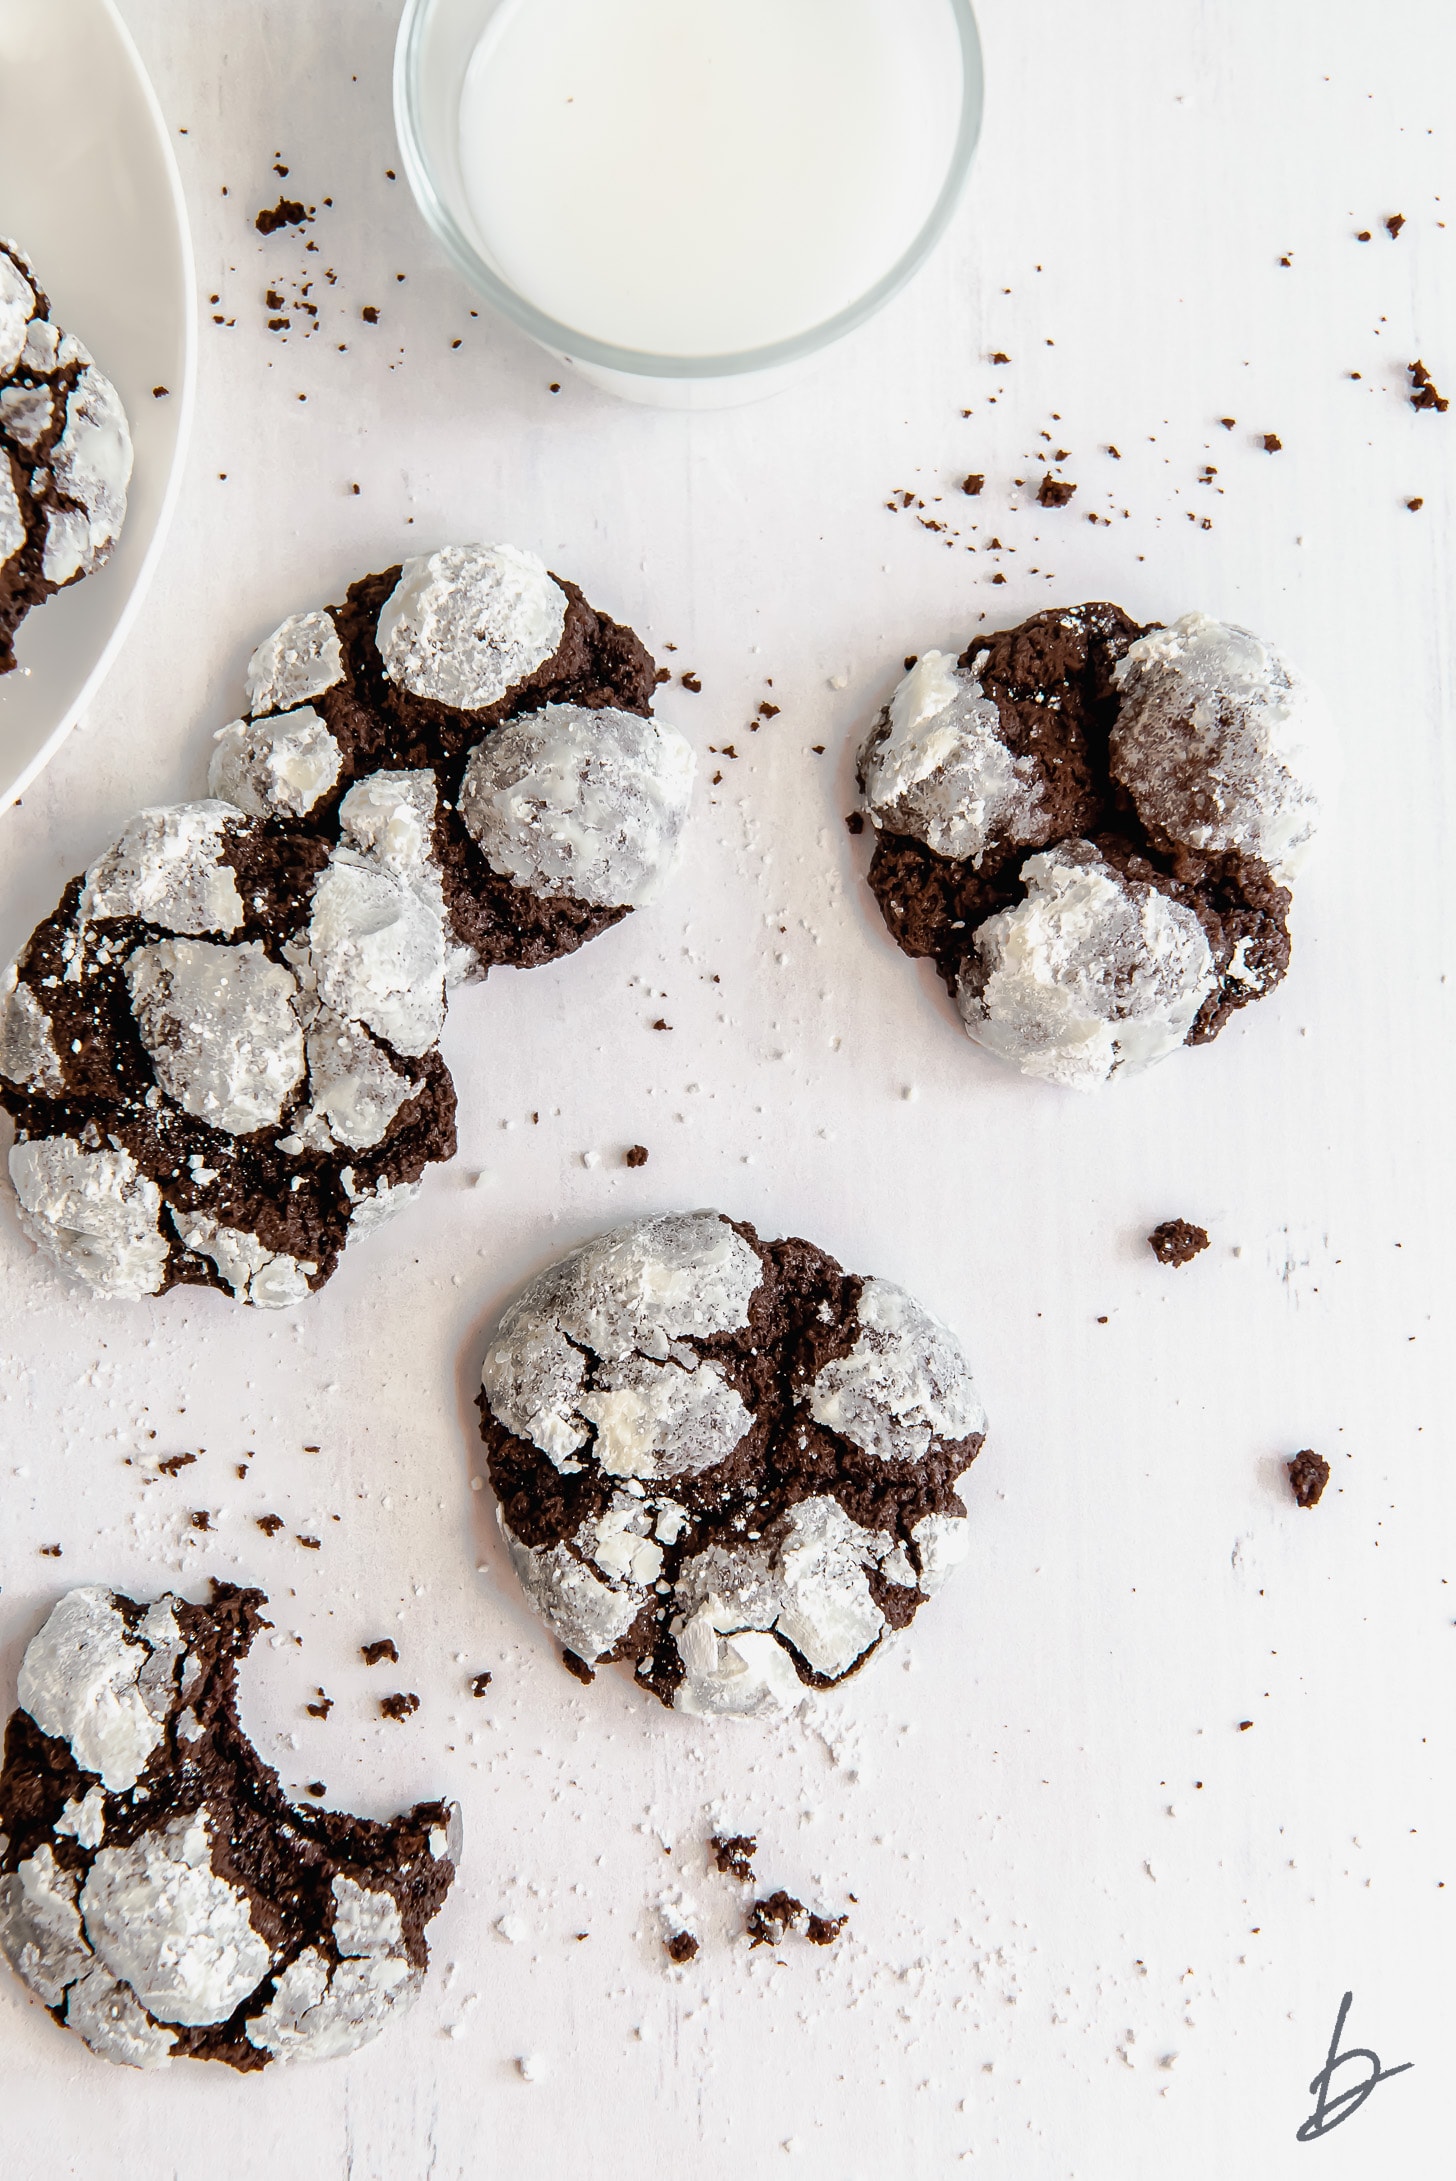 chocolate crinkle cookies on a white surface next to glass of milk